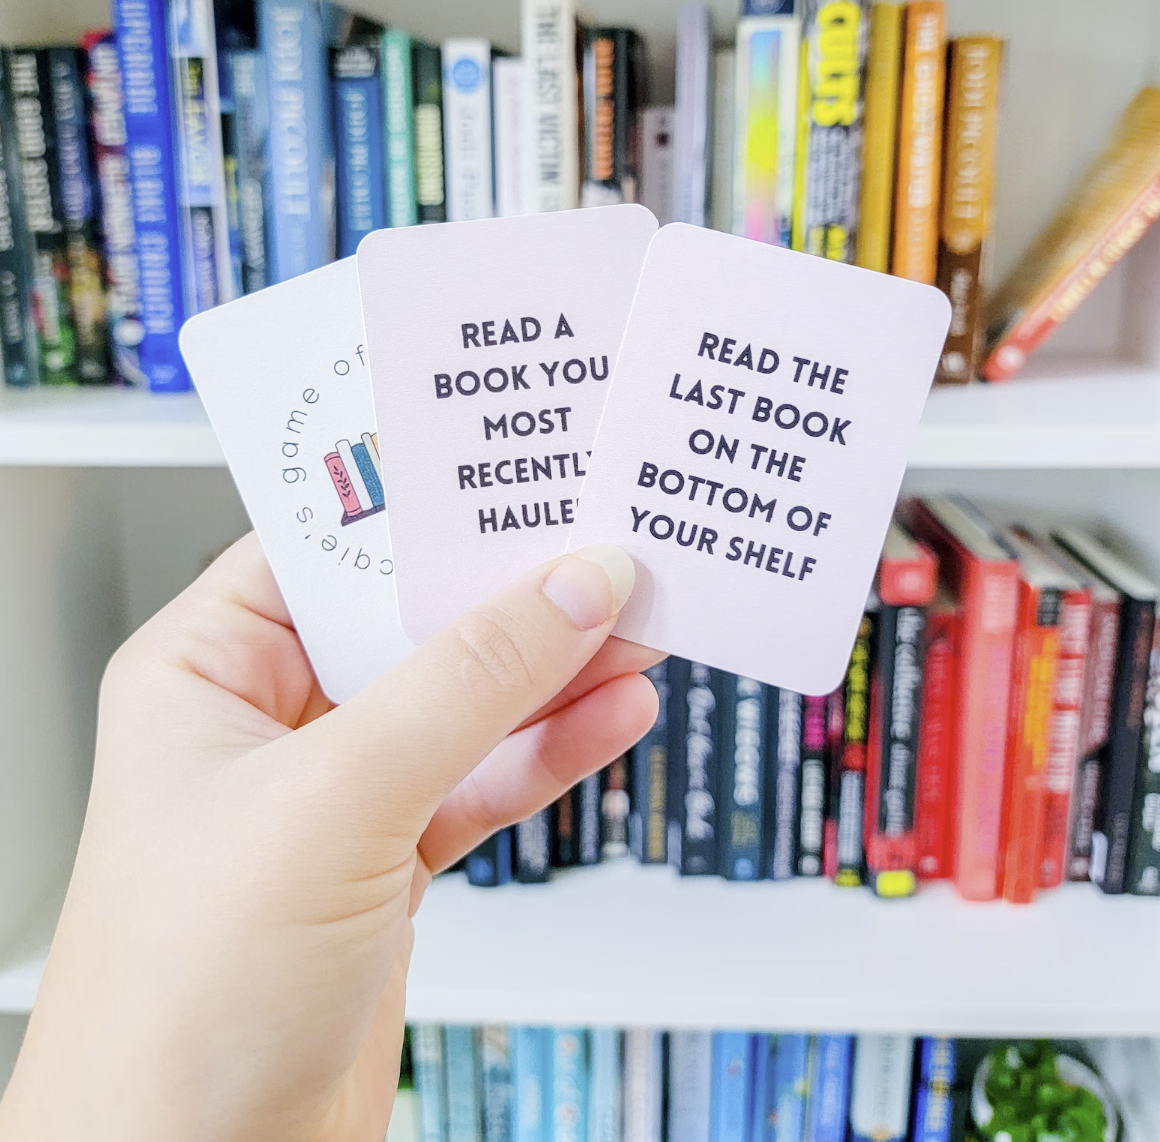 TBR game cards with book spines on the front and prompts such as "read a book you most recently hauled" and "read the last book on the bottom of your shelf."